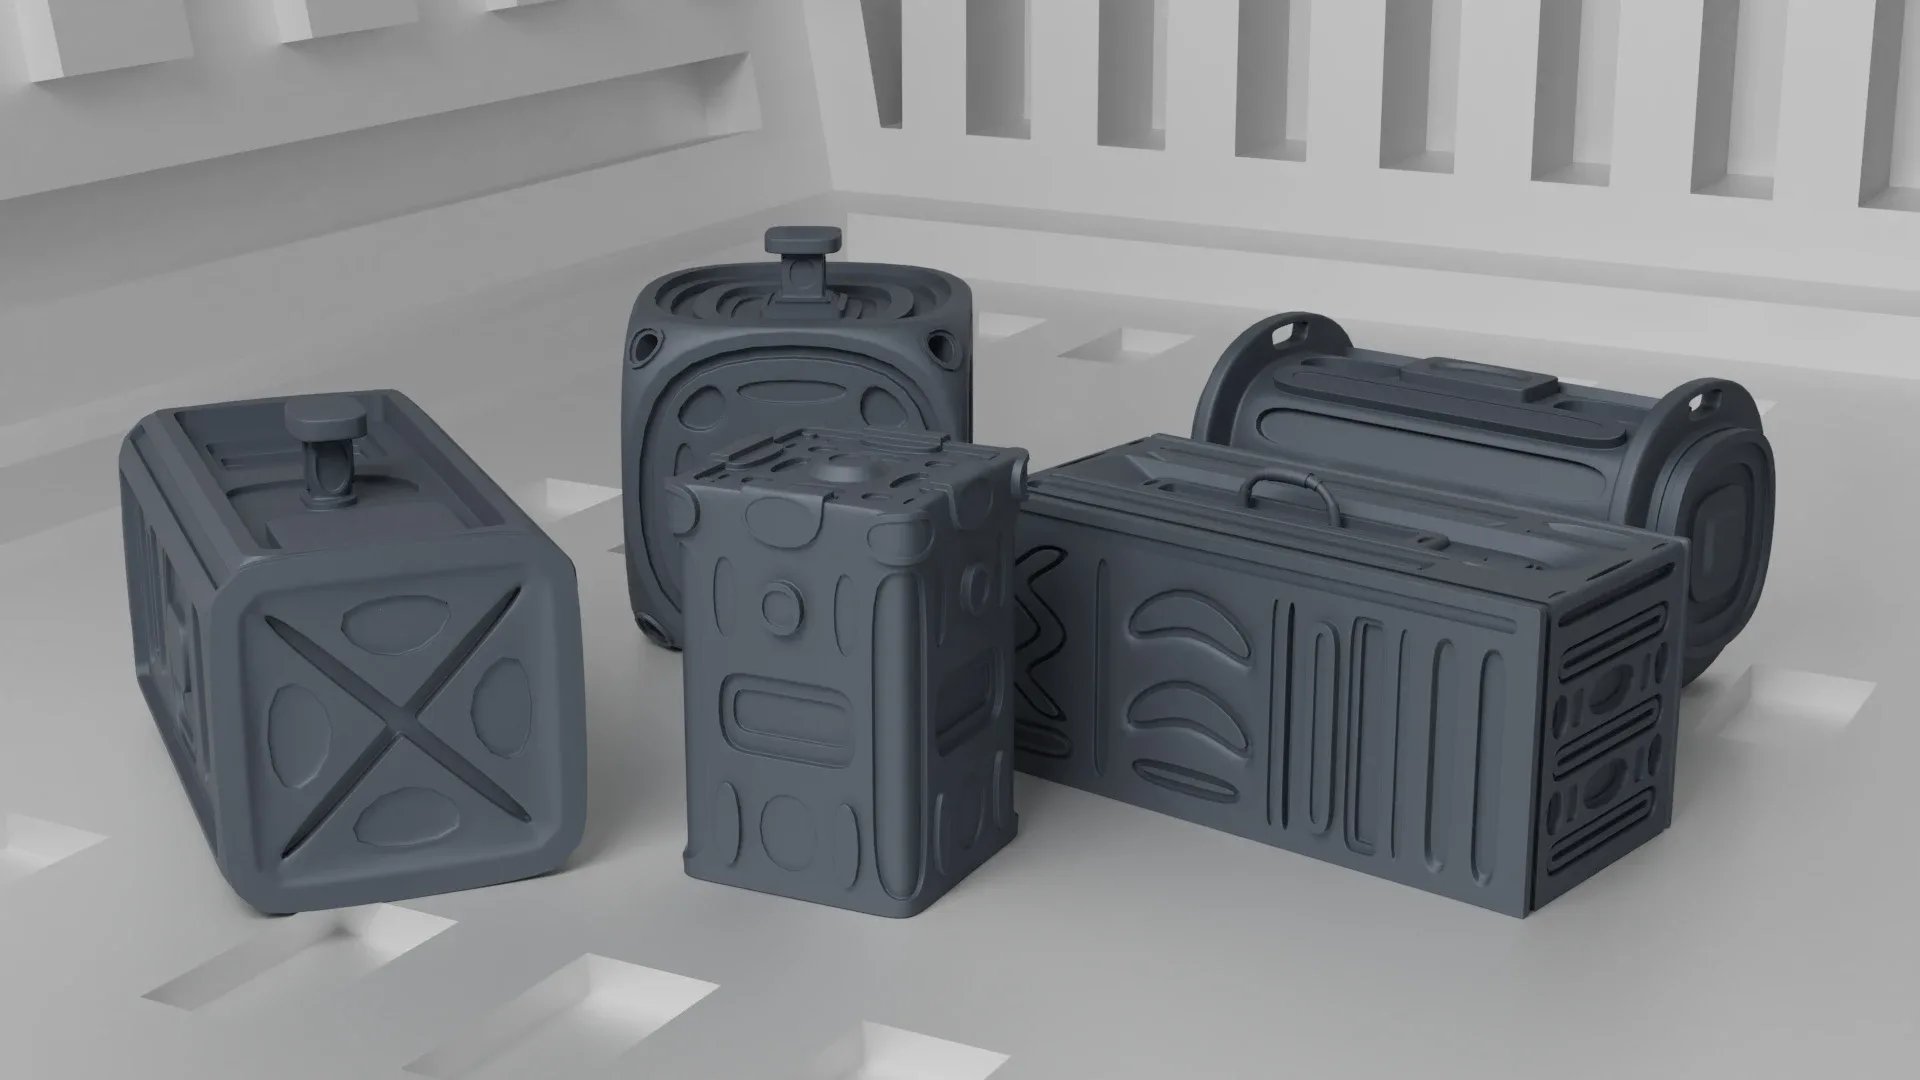 Sci-Fi Containers kit